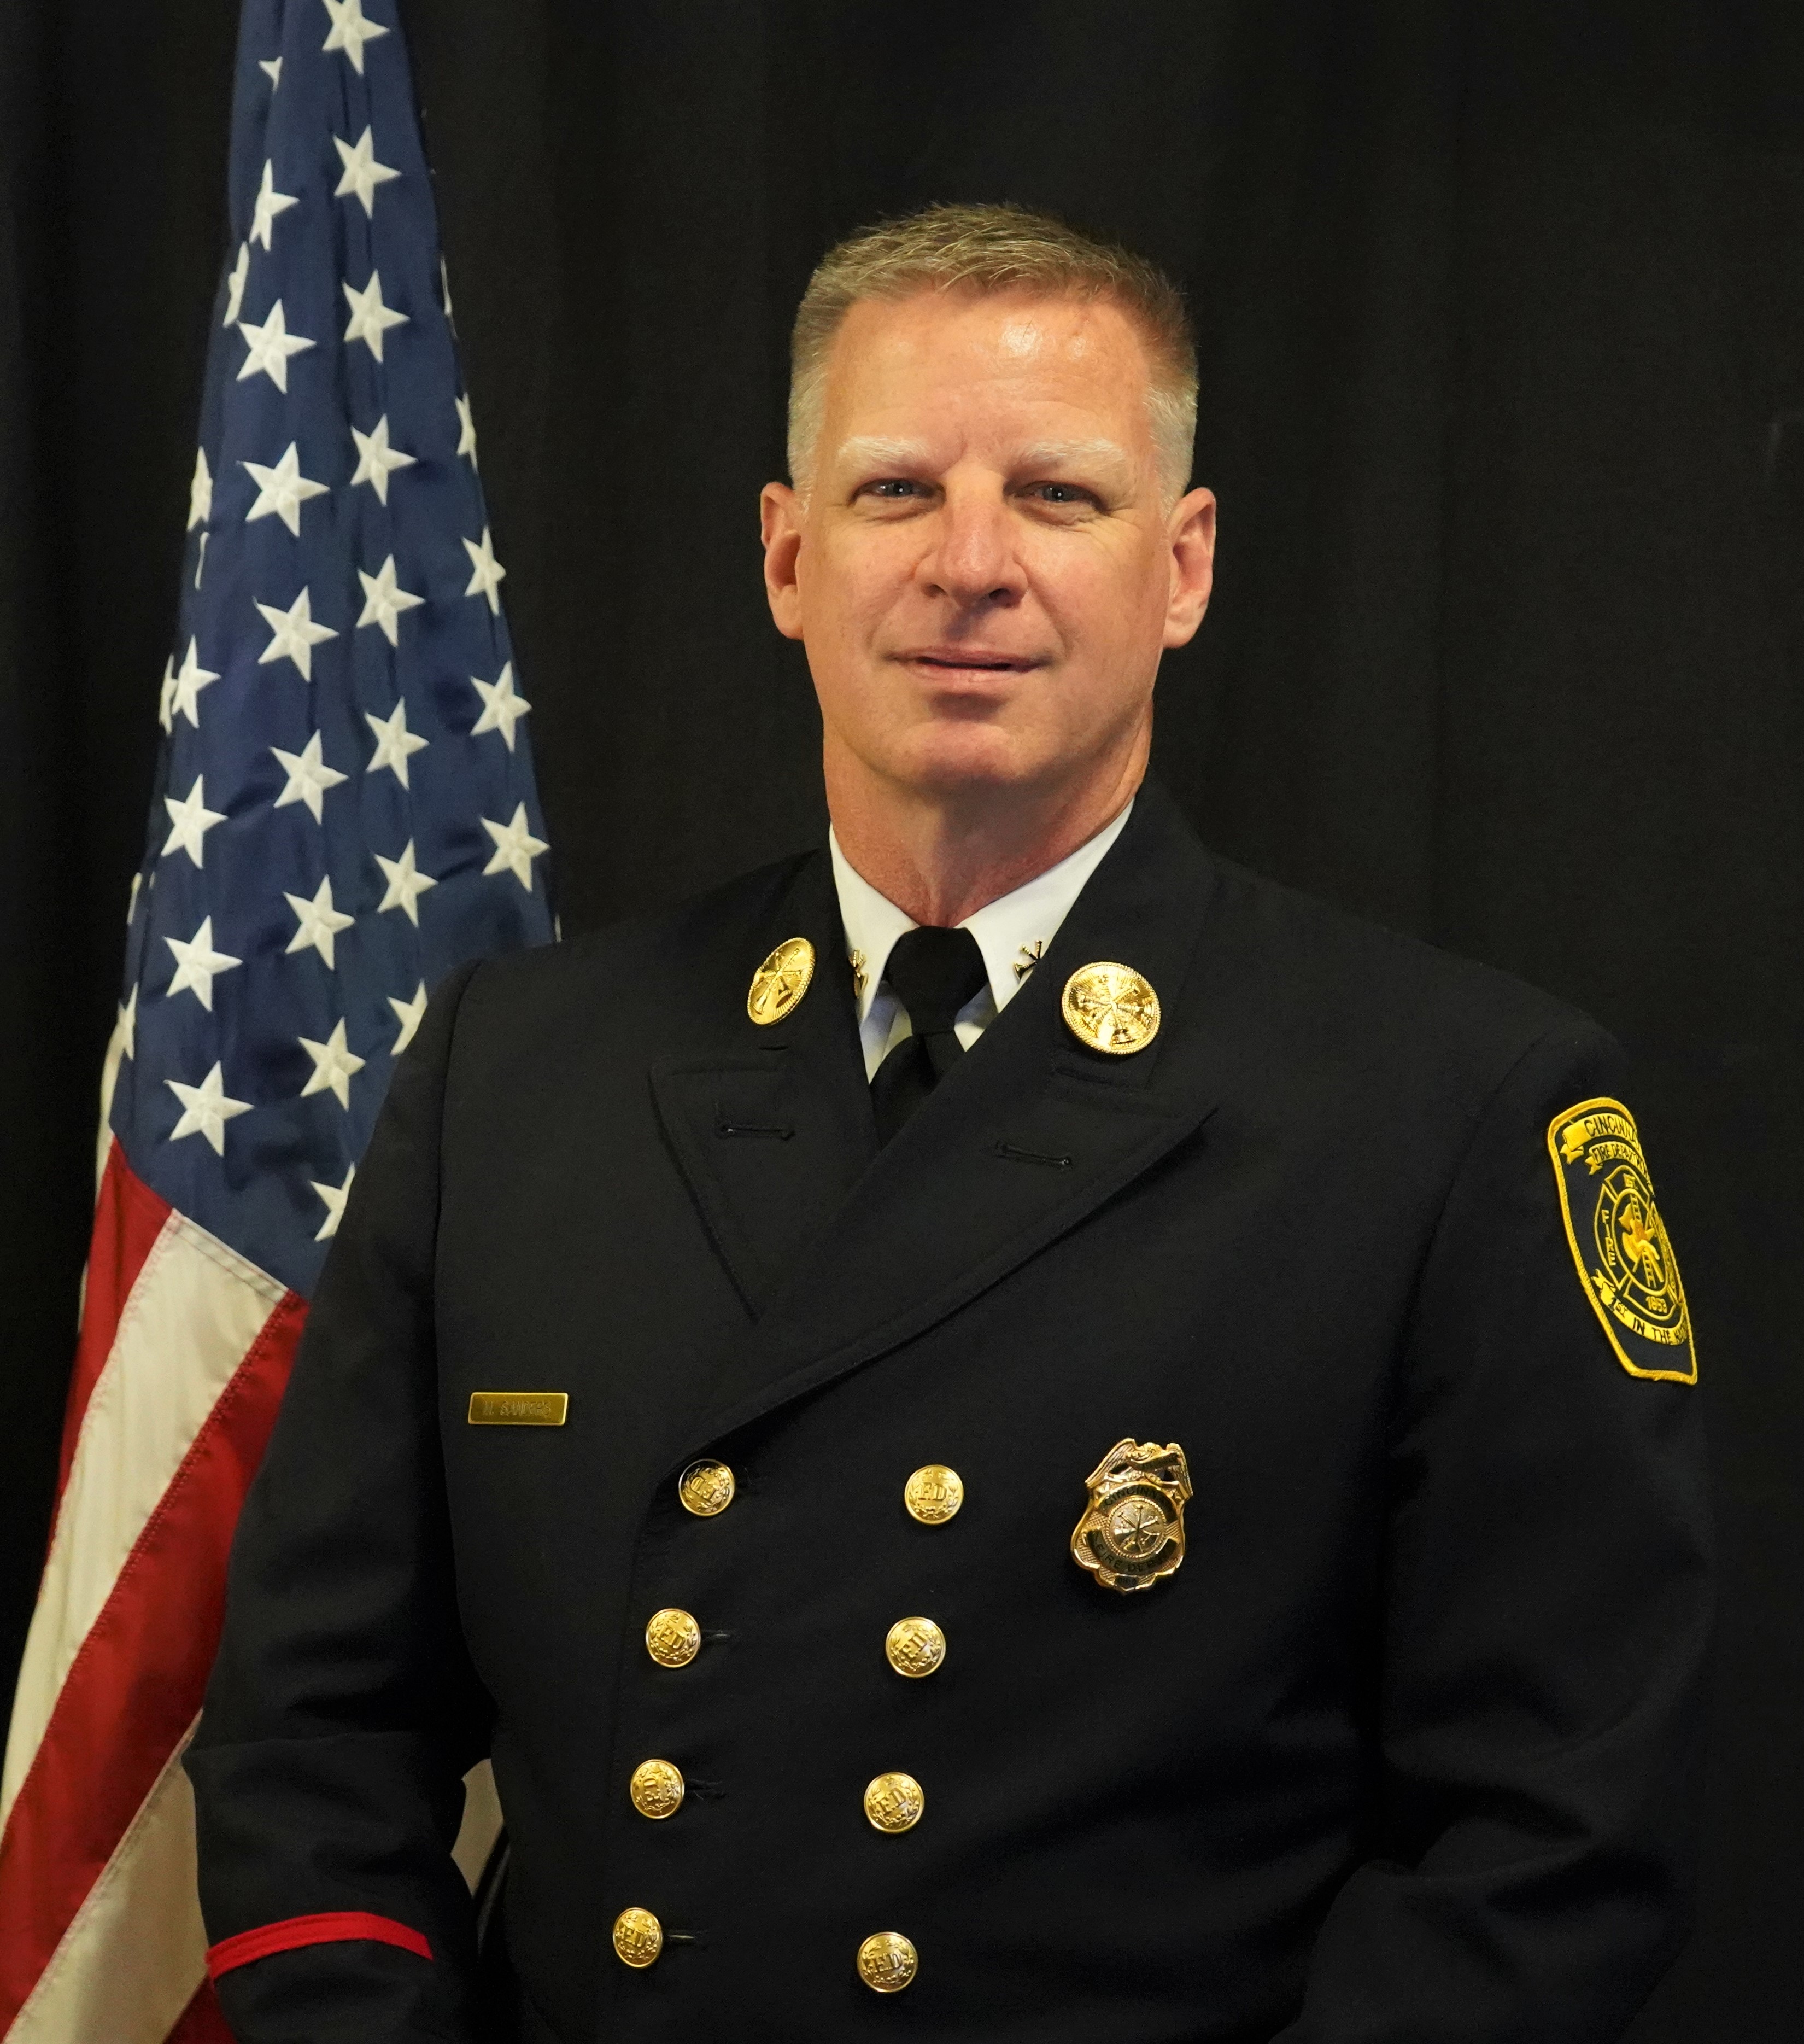 Assistant Fire Chief Mark J. Sanders